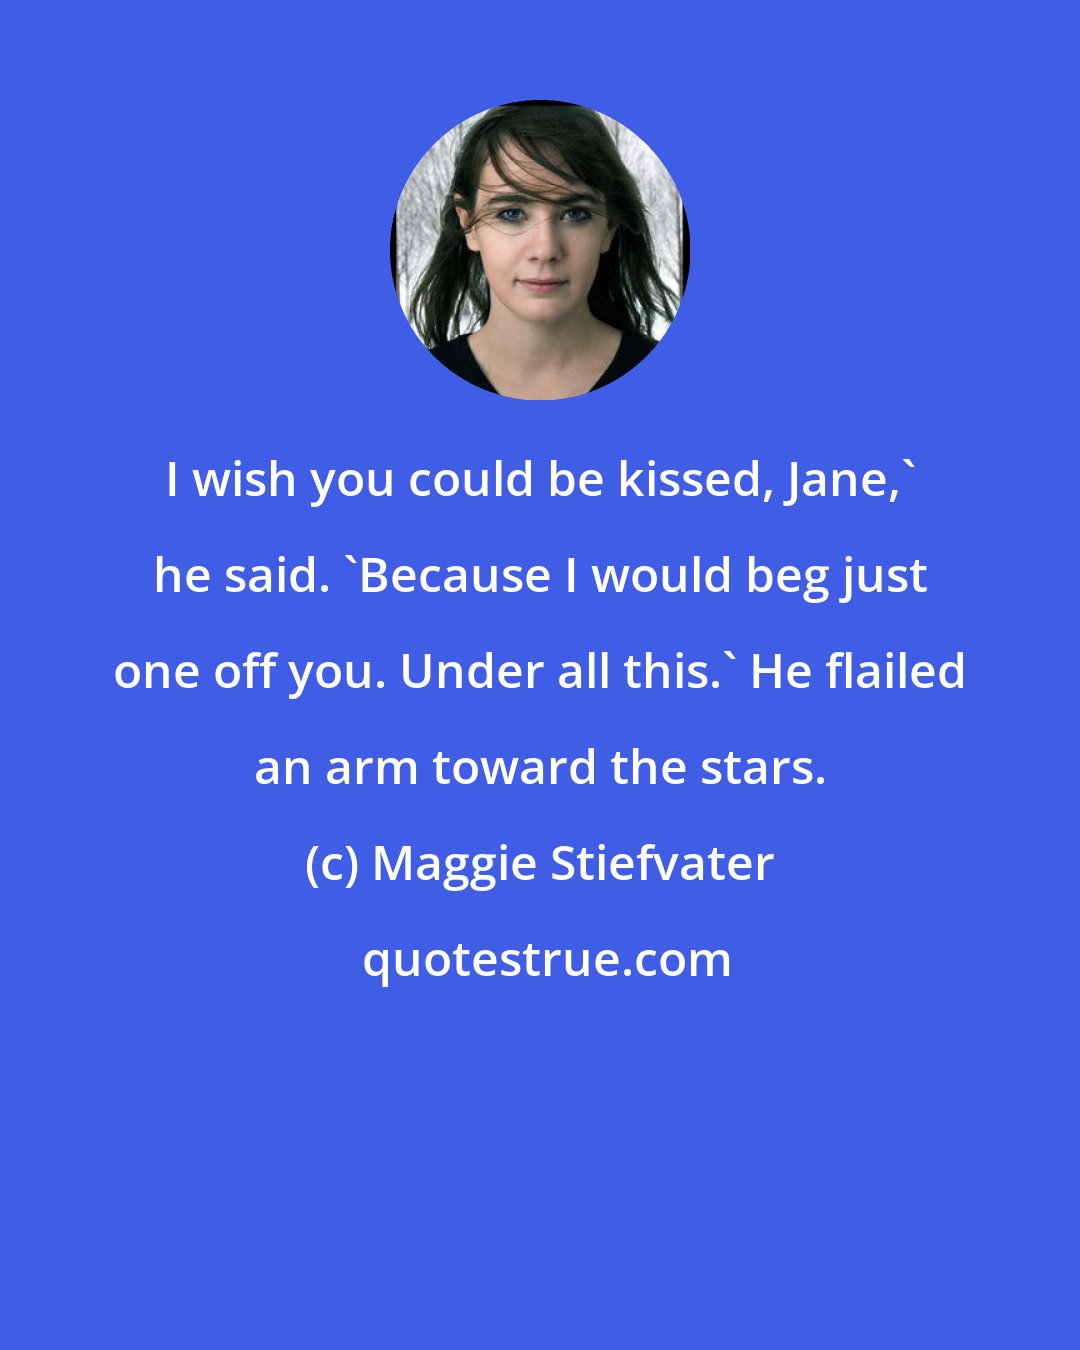 Maggie Stiefvater: I wish you could be kissed, Jane,' he said. 'Because I would beg just one off you. Under all this.' He flailed an arm toward the stars.